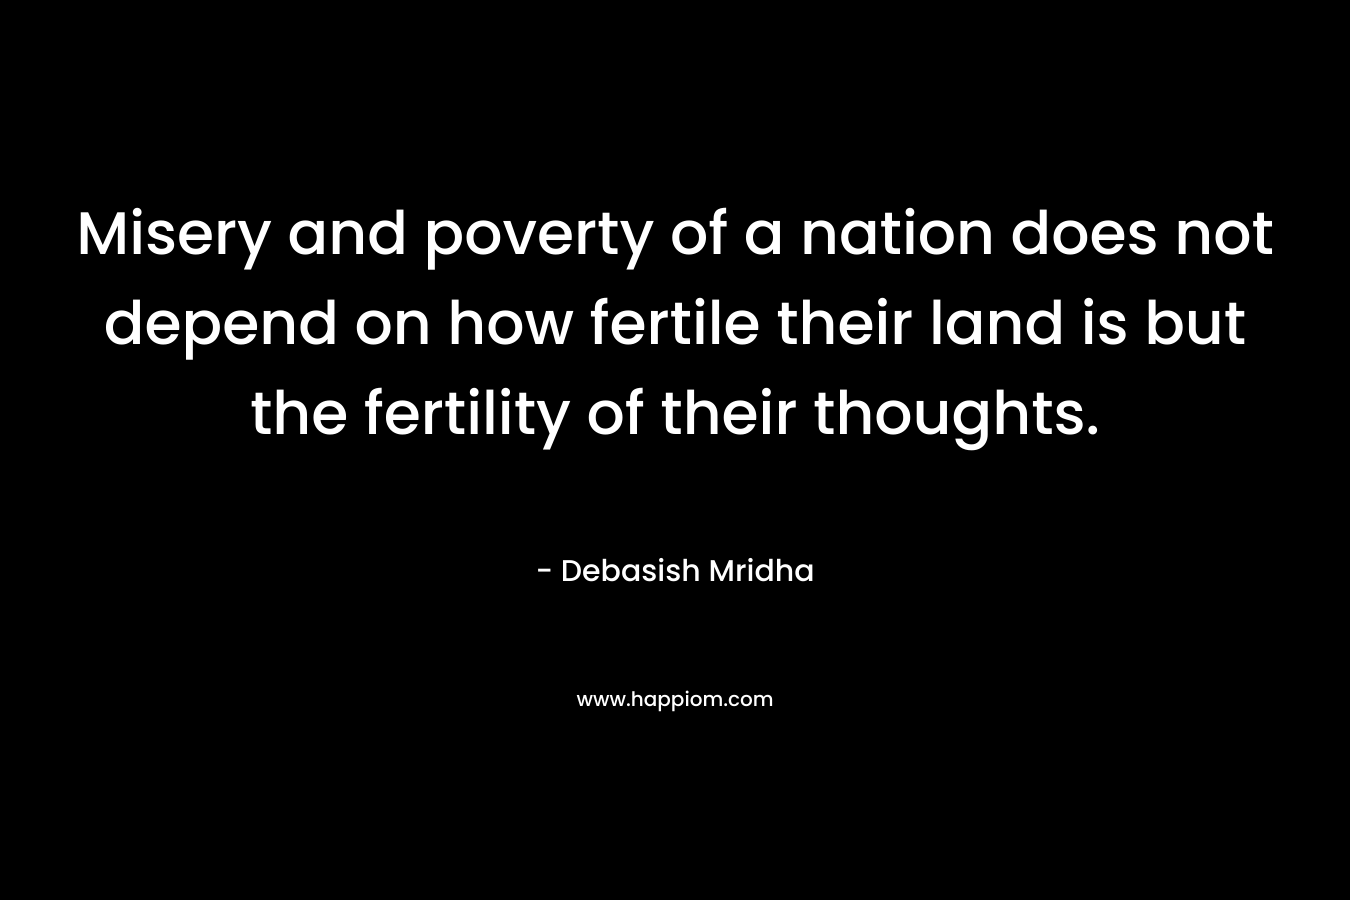 Misery and poverty of a nation does not depend on how fertile their land is but the fertility of their thoughts. – Debasish Mridha